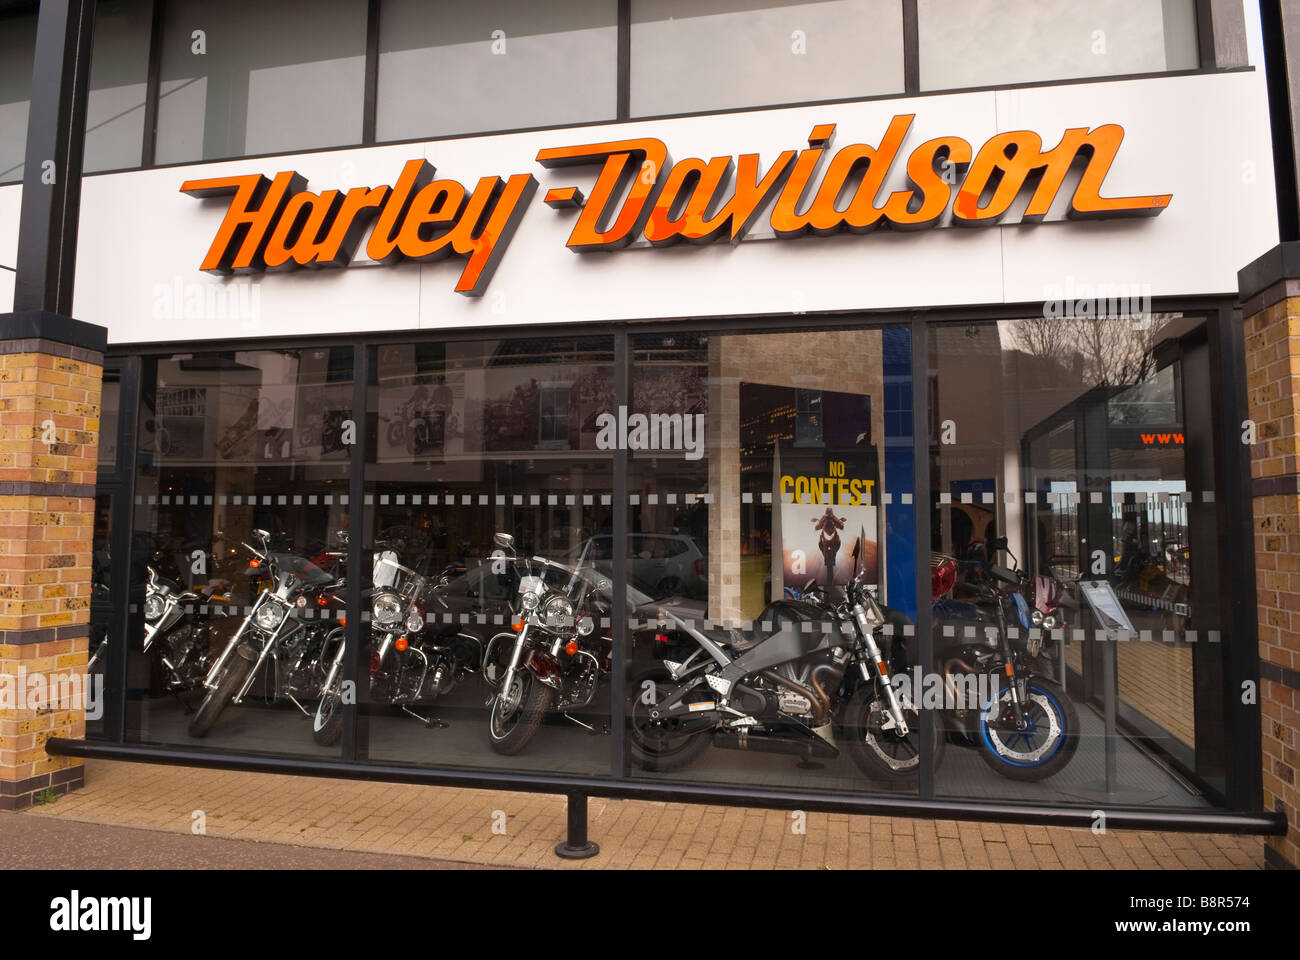 Harley Davidson Motor Cycles Motorbike Shop Store Selling Motorcycles And Motor Bikes In Norwich Norfolk Uk Stock Photo Alamy